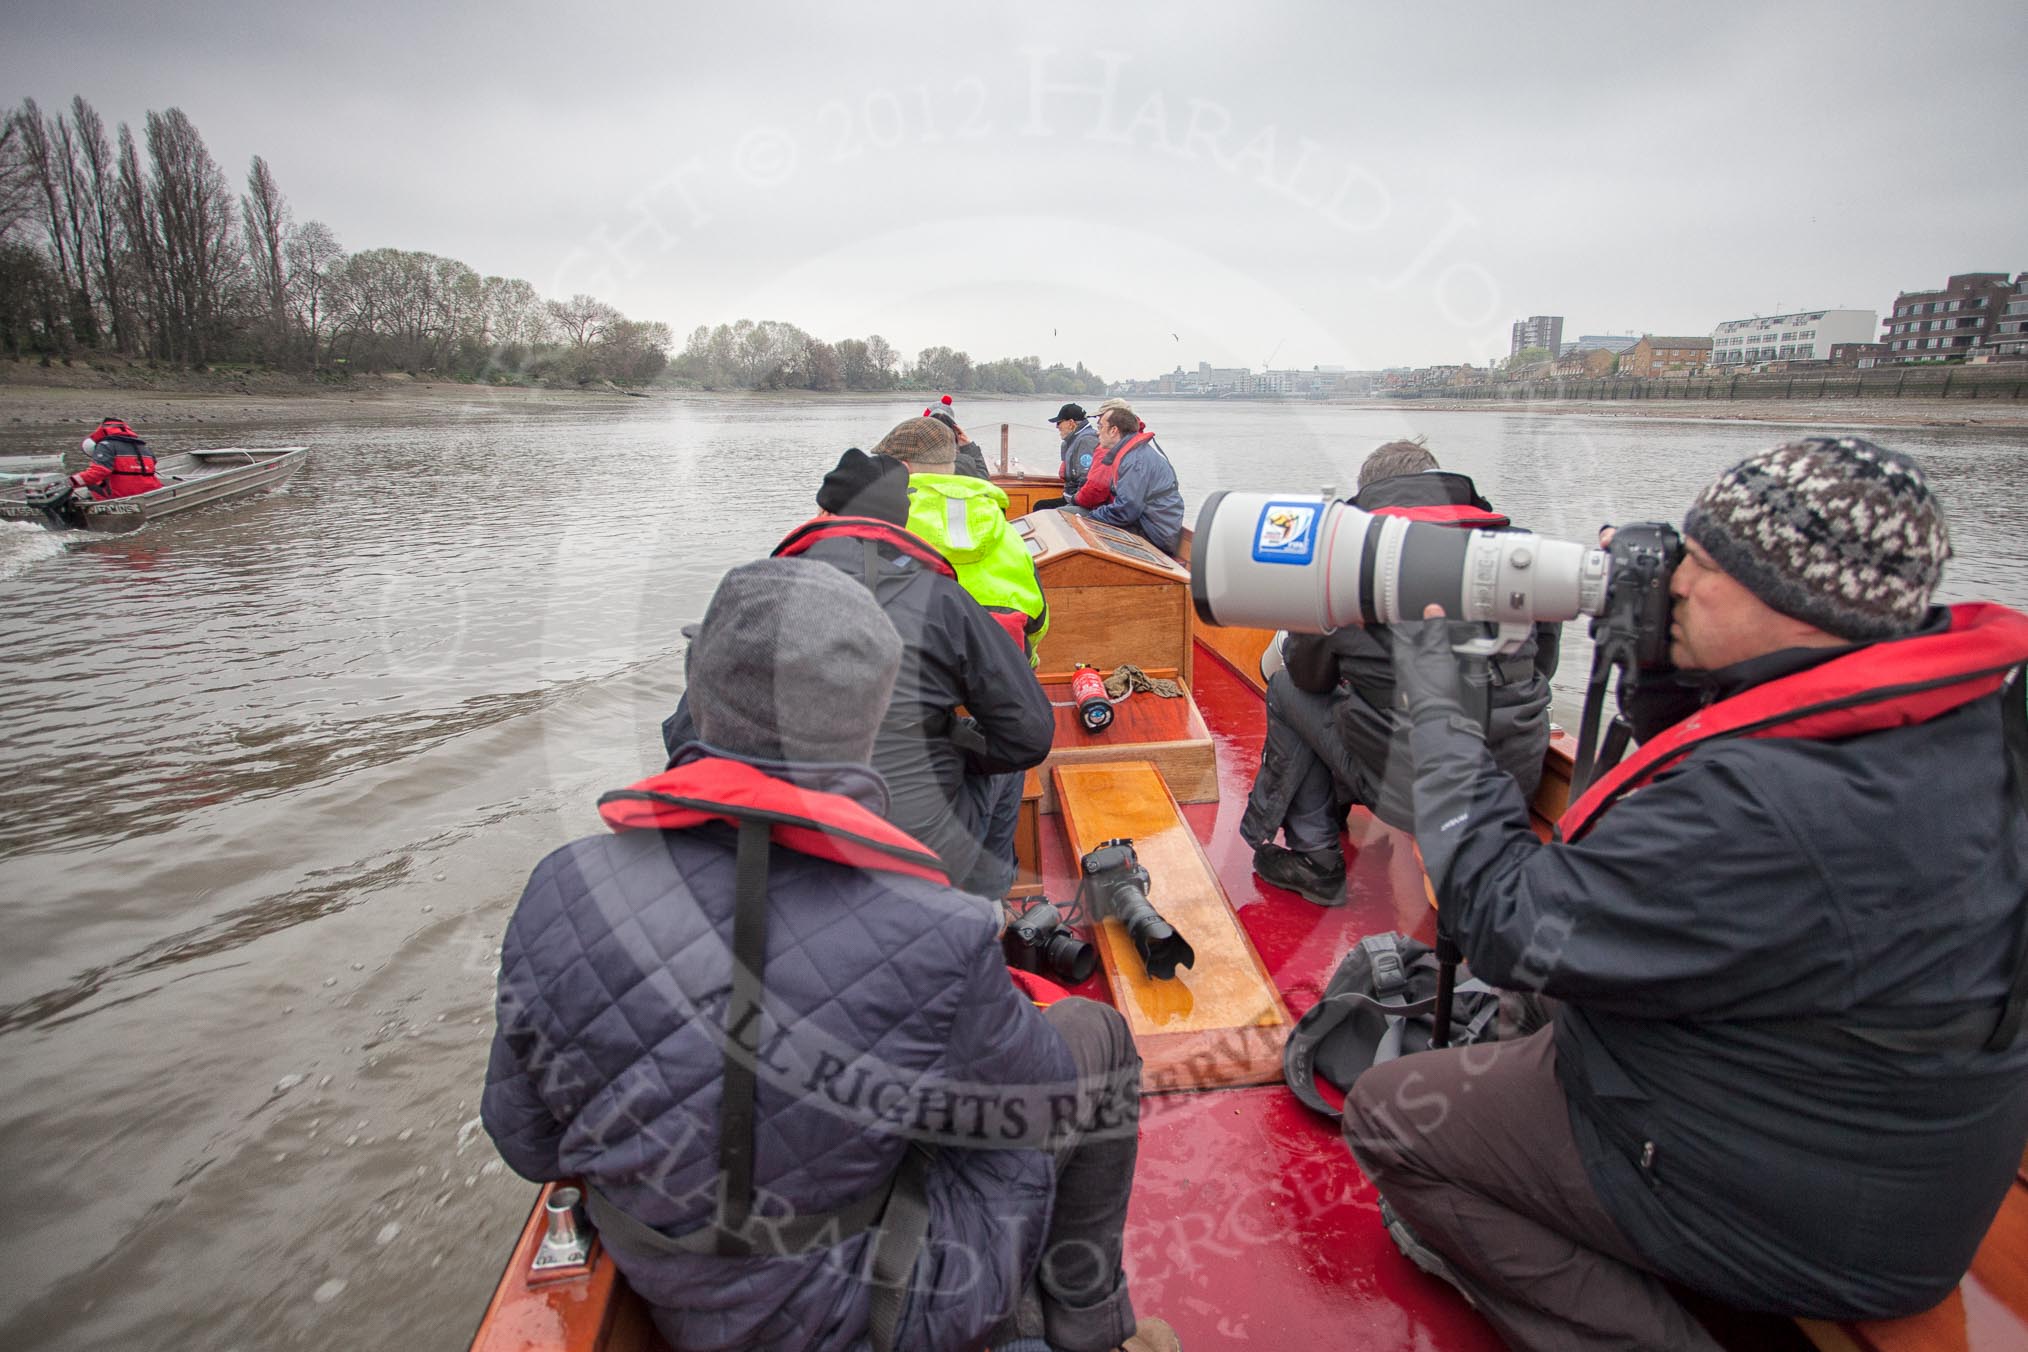 A press launch on the River Thames between Putney Bridge and Hammersmith Bridge, following the Cambridge University Boat Club Blue Boat and the Cambridge chief coach Steve Trapmore.